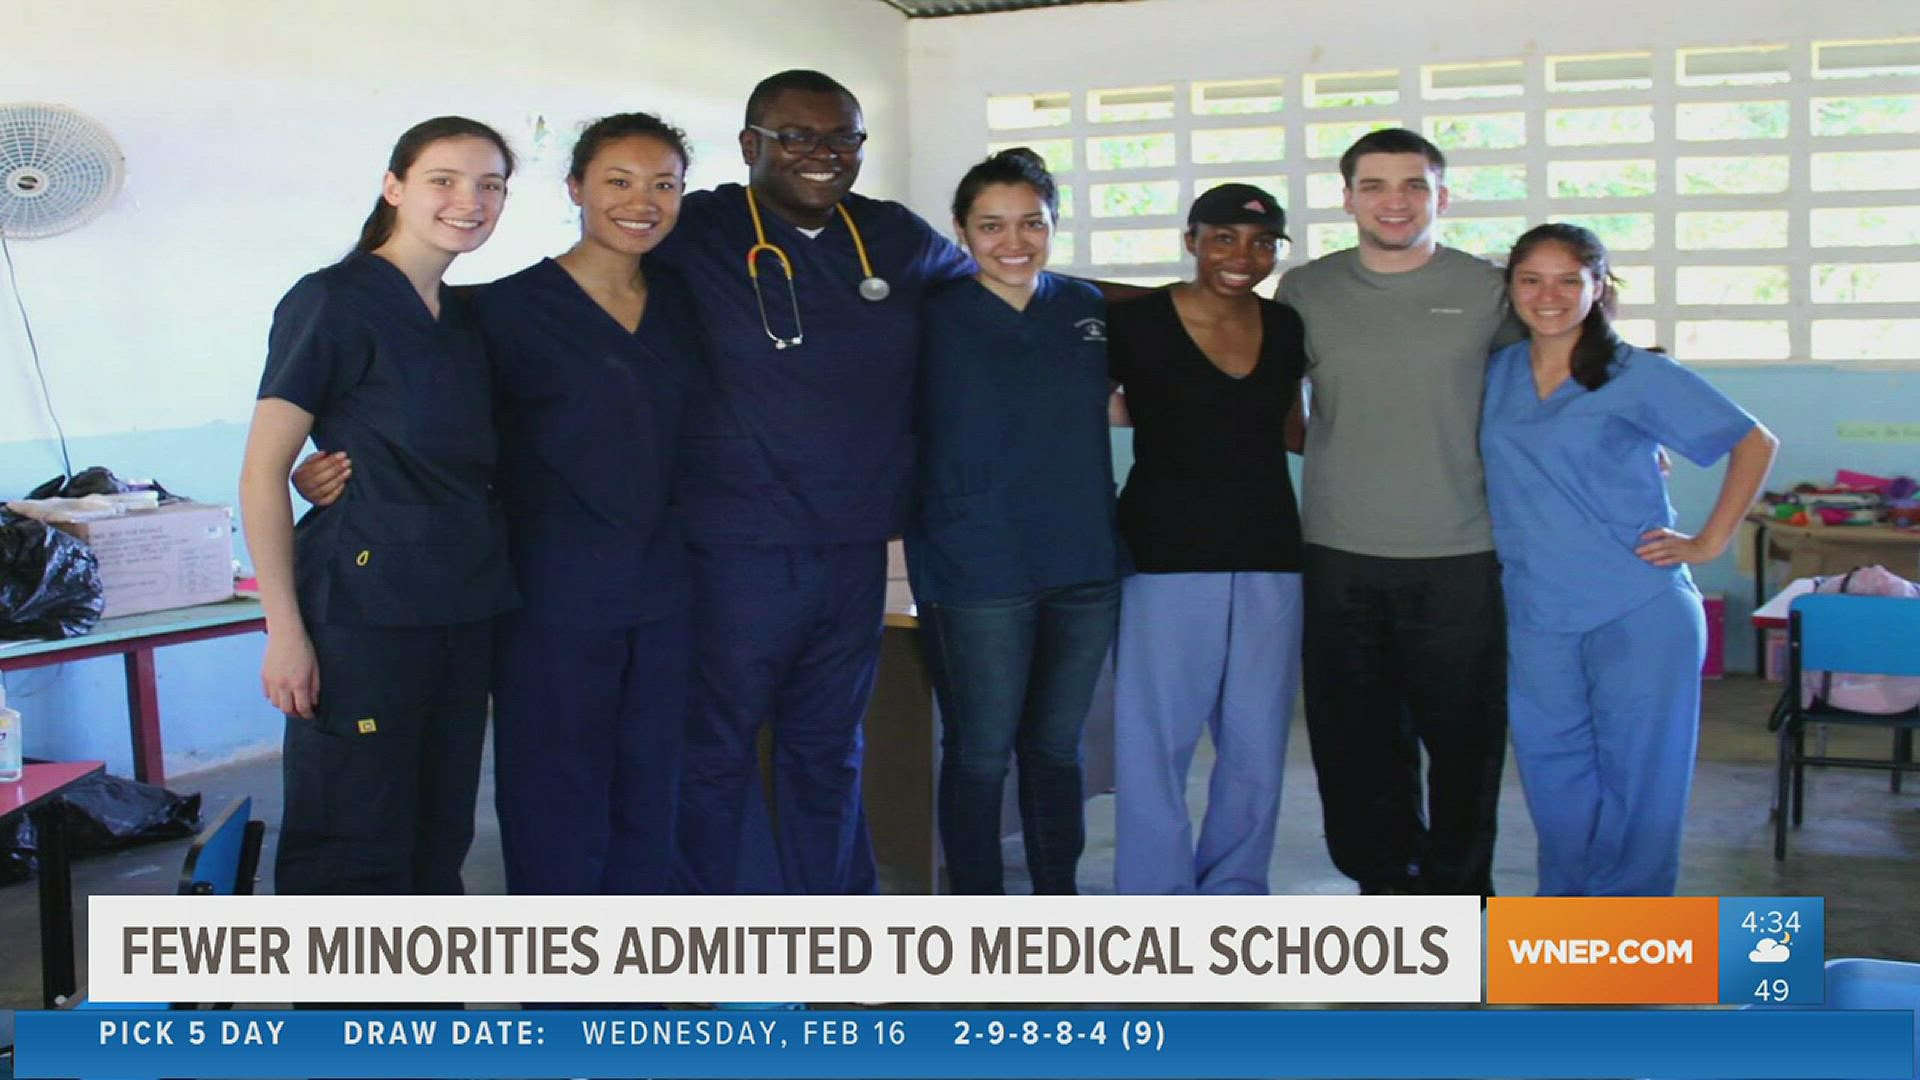 Our spotlight on Black History Month continues. Newswatch 16's Lisa Washington shows us the effort to increase diversity at our area's only medical school.